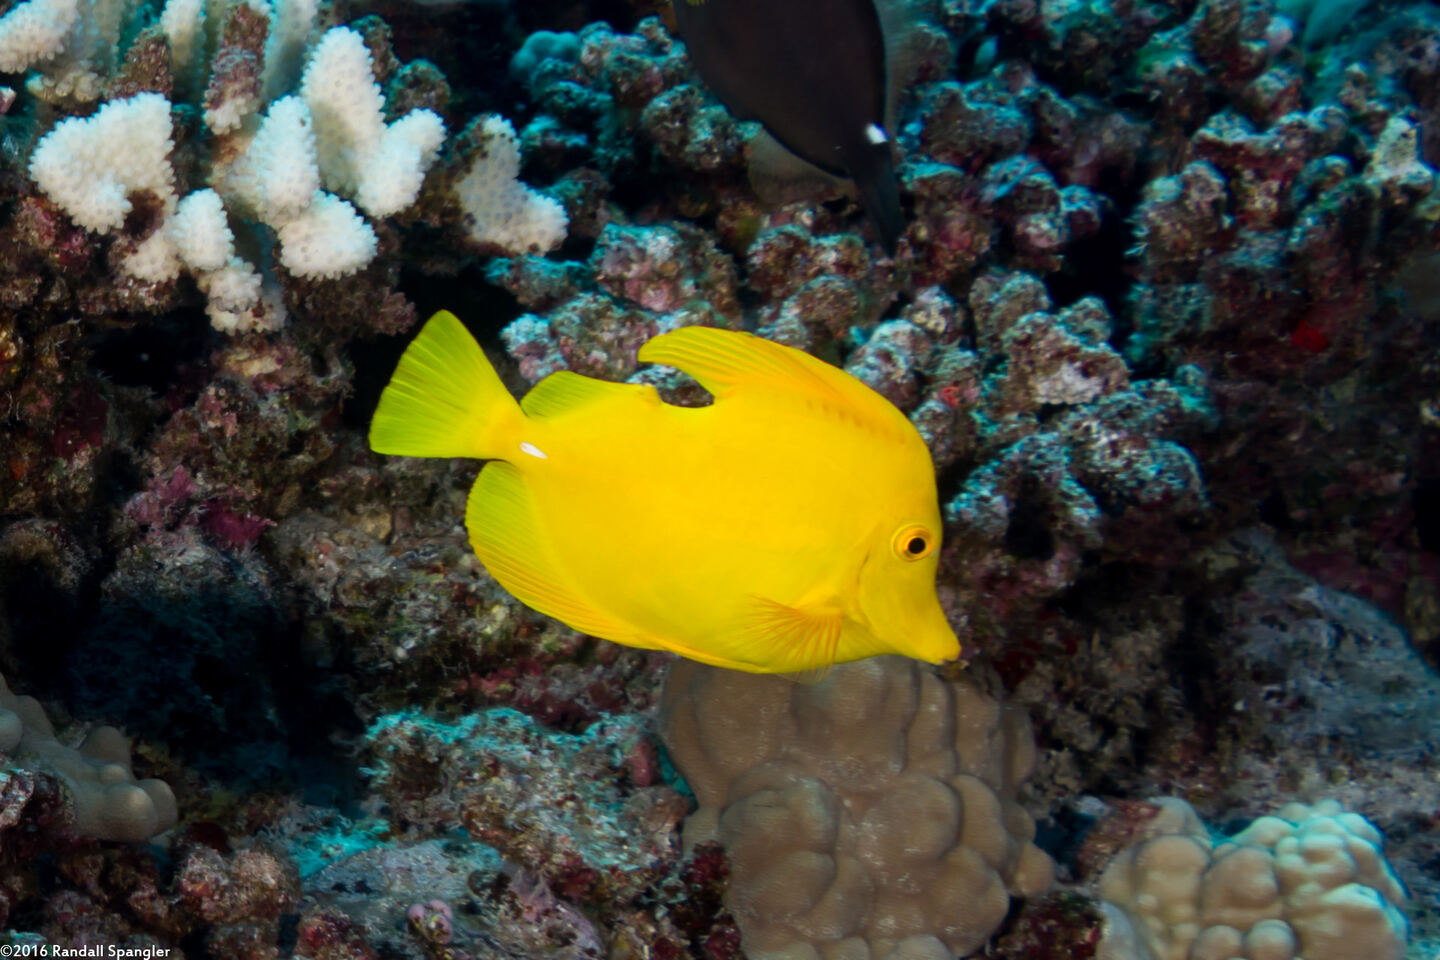 Zebrasoma flavescens (Yellow Tang); This one has a bite taken out of it, probably by an eel